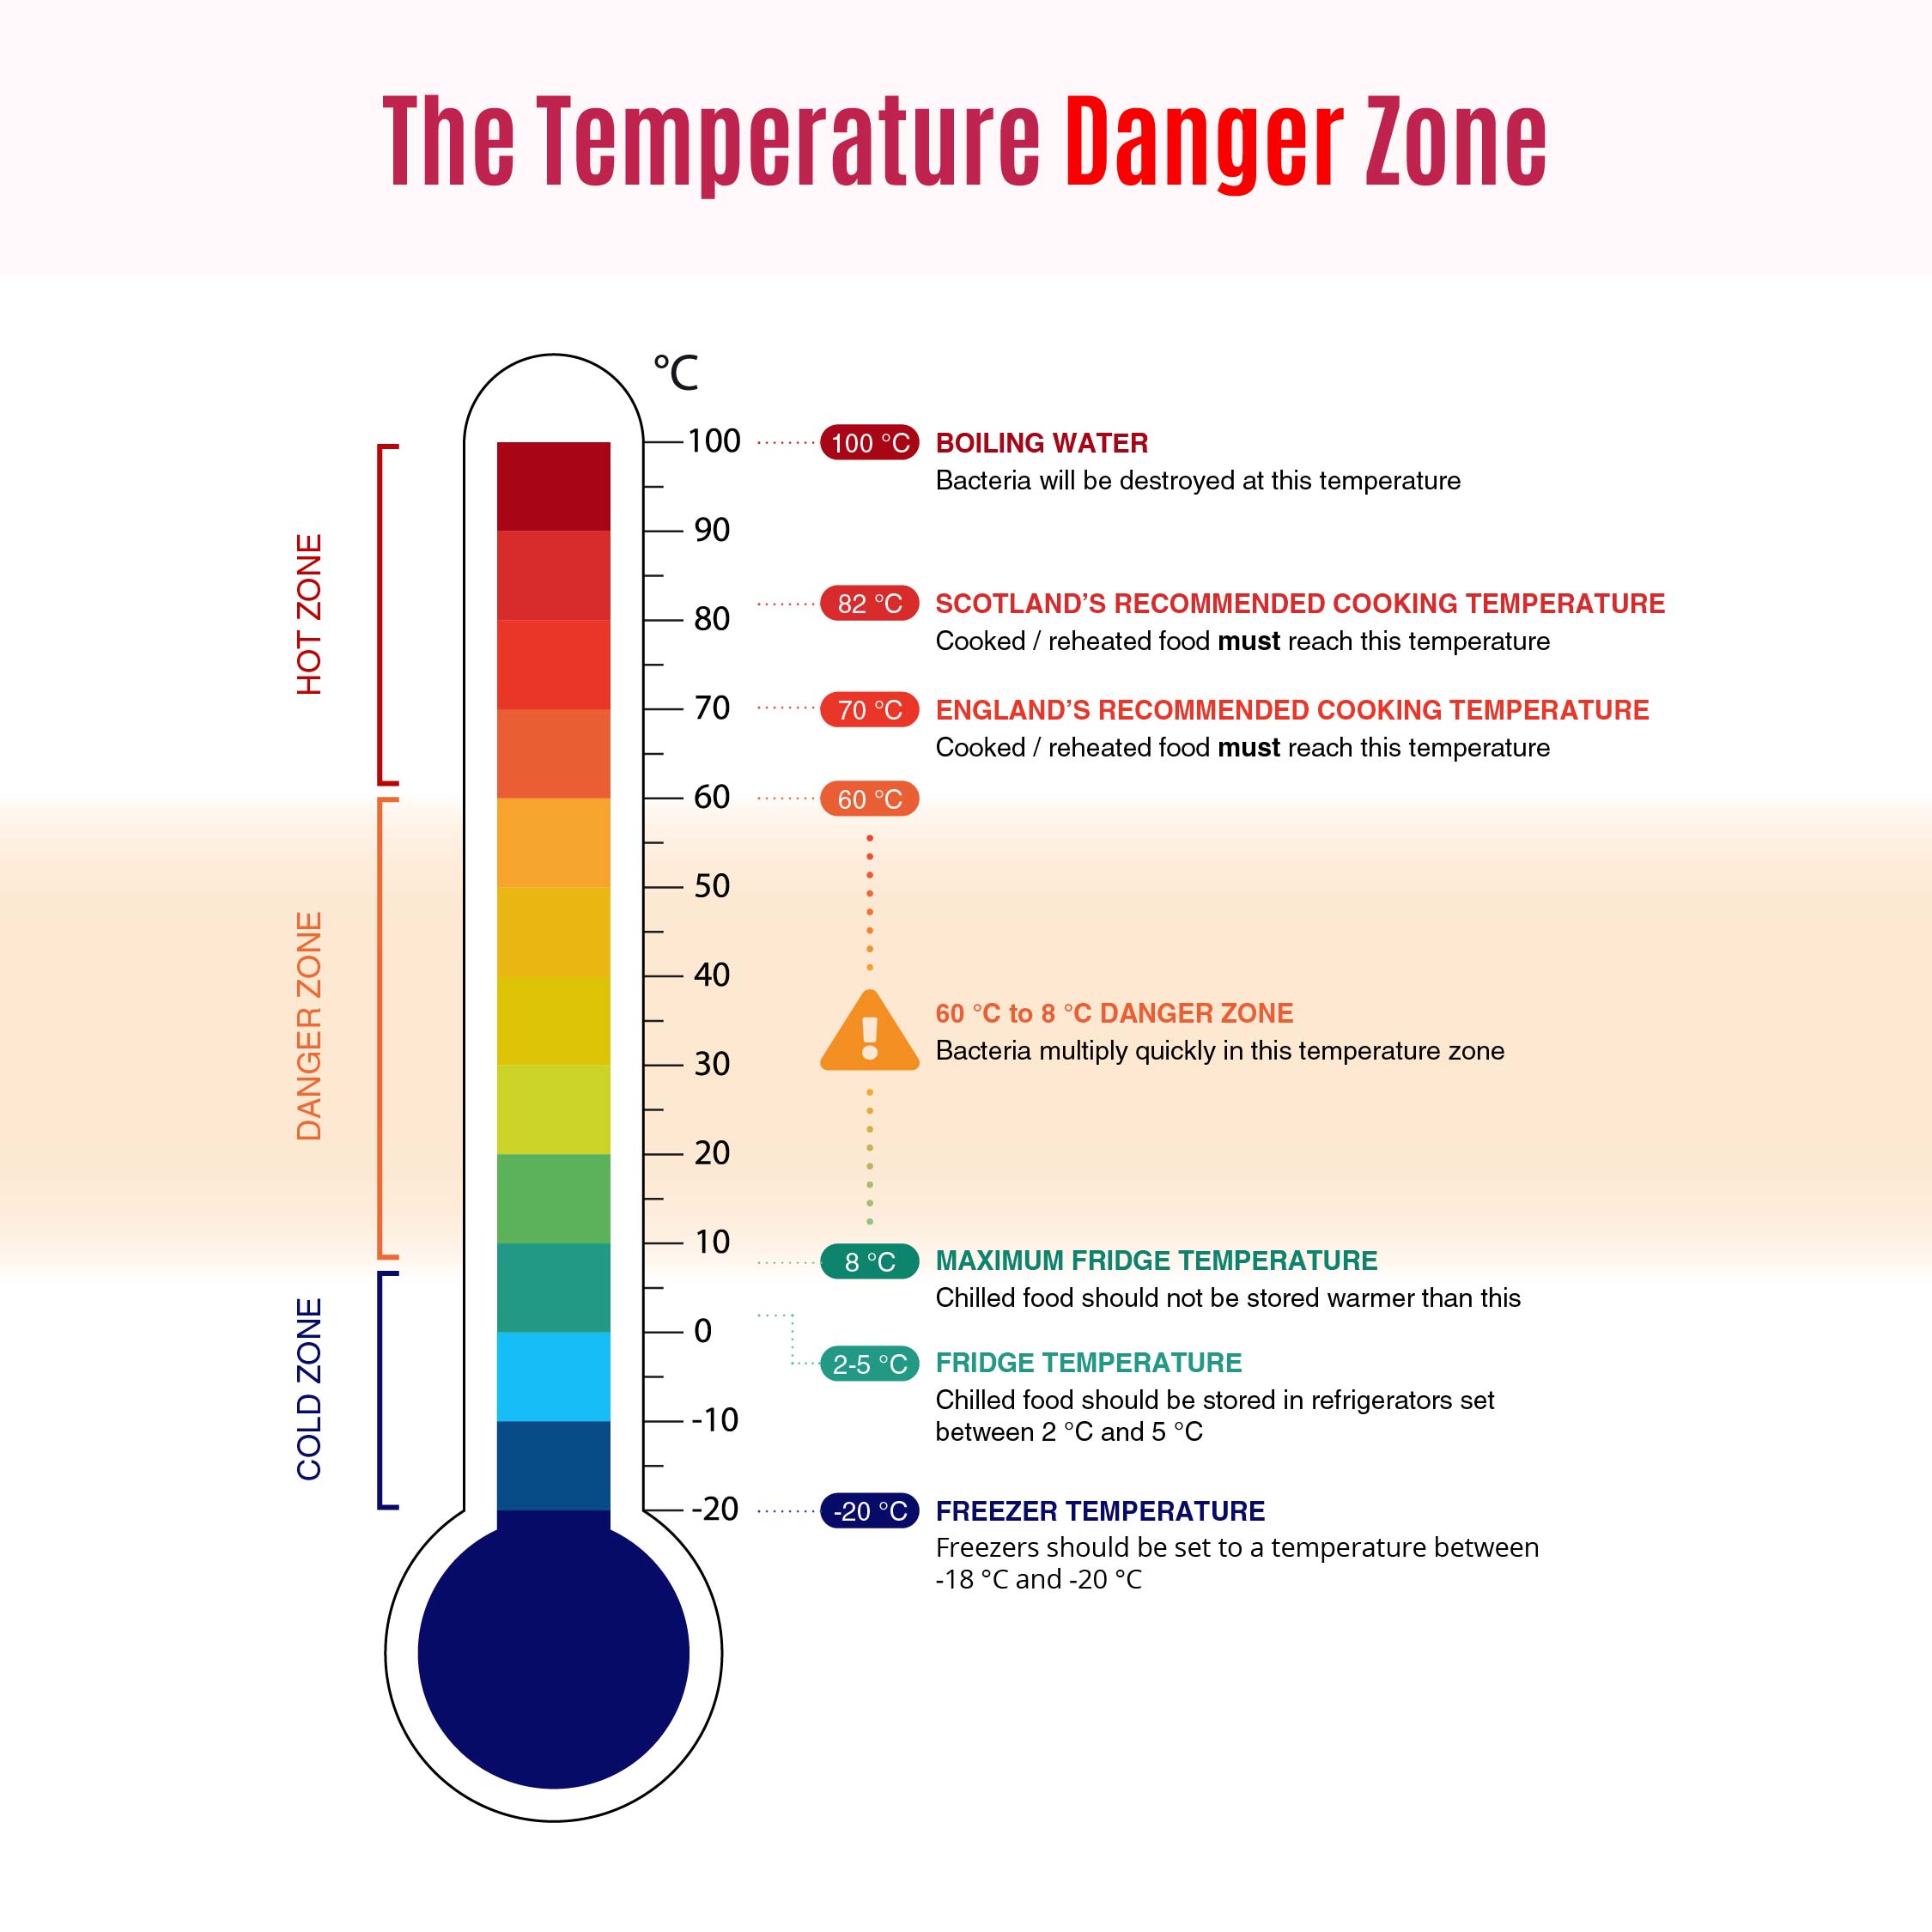 The chart illustrating the temperature danger zone